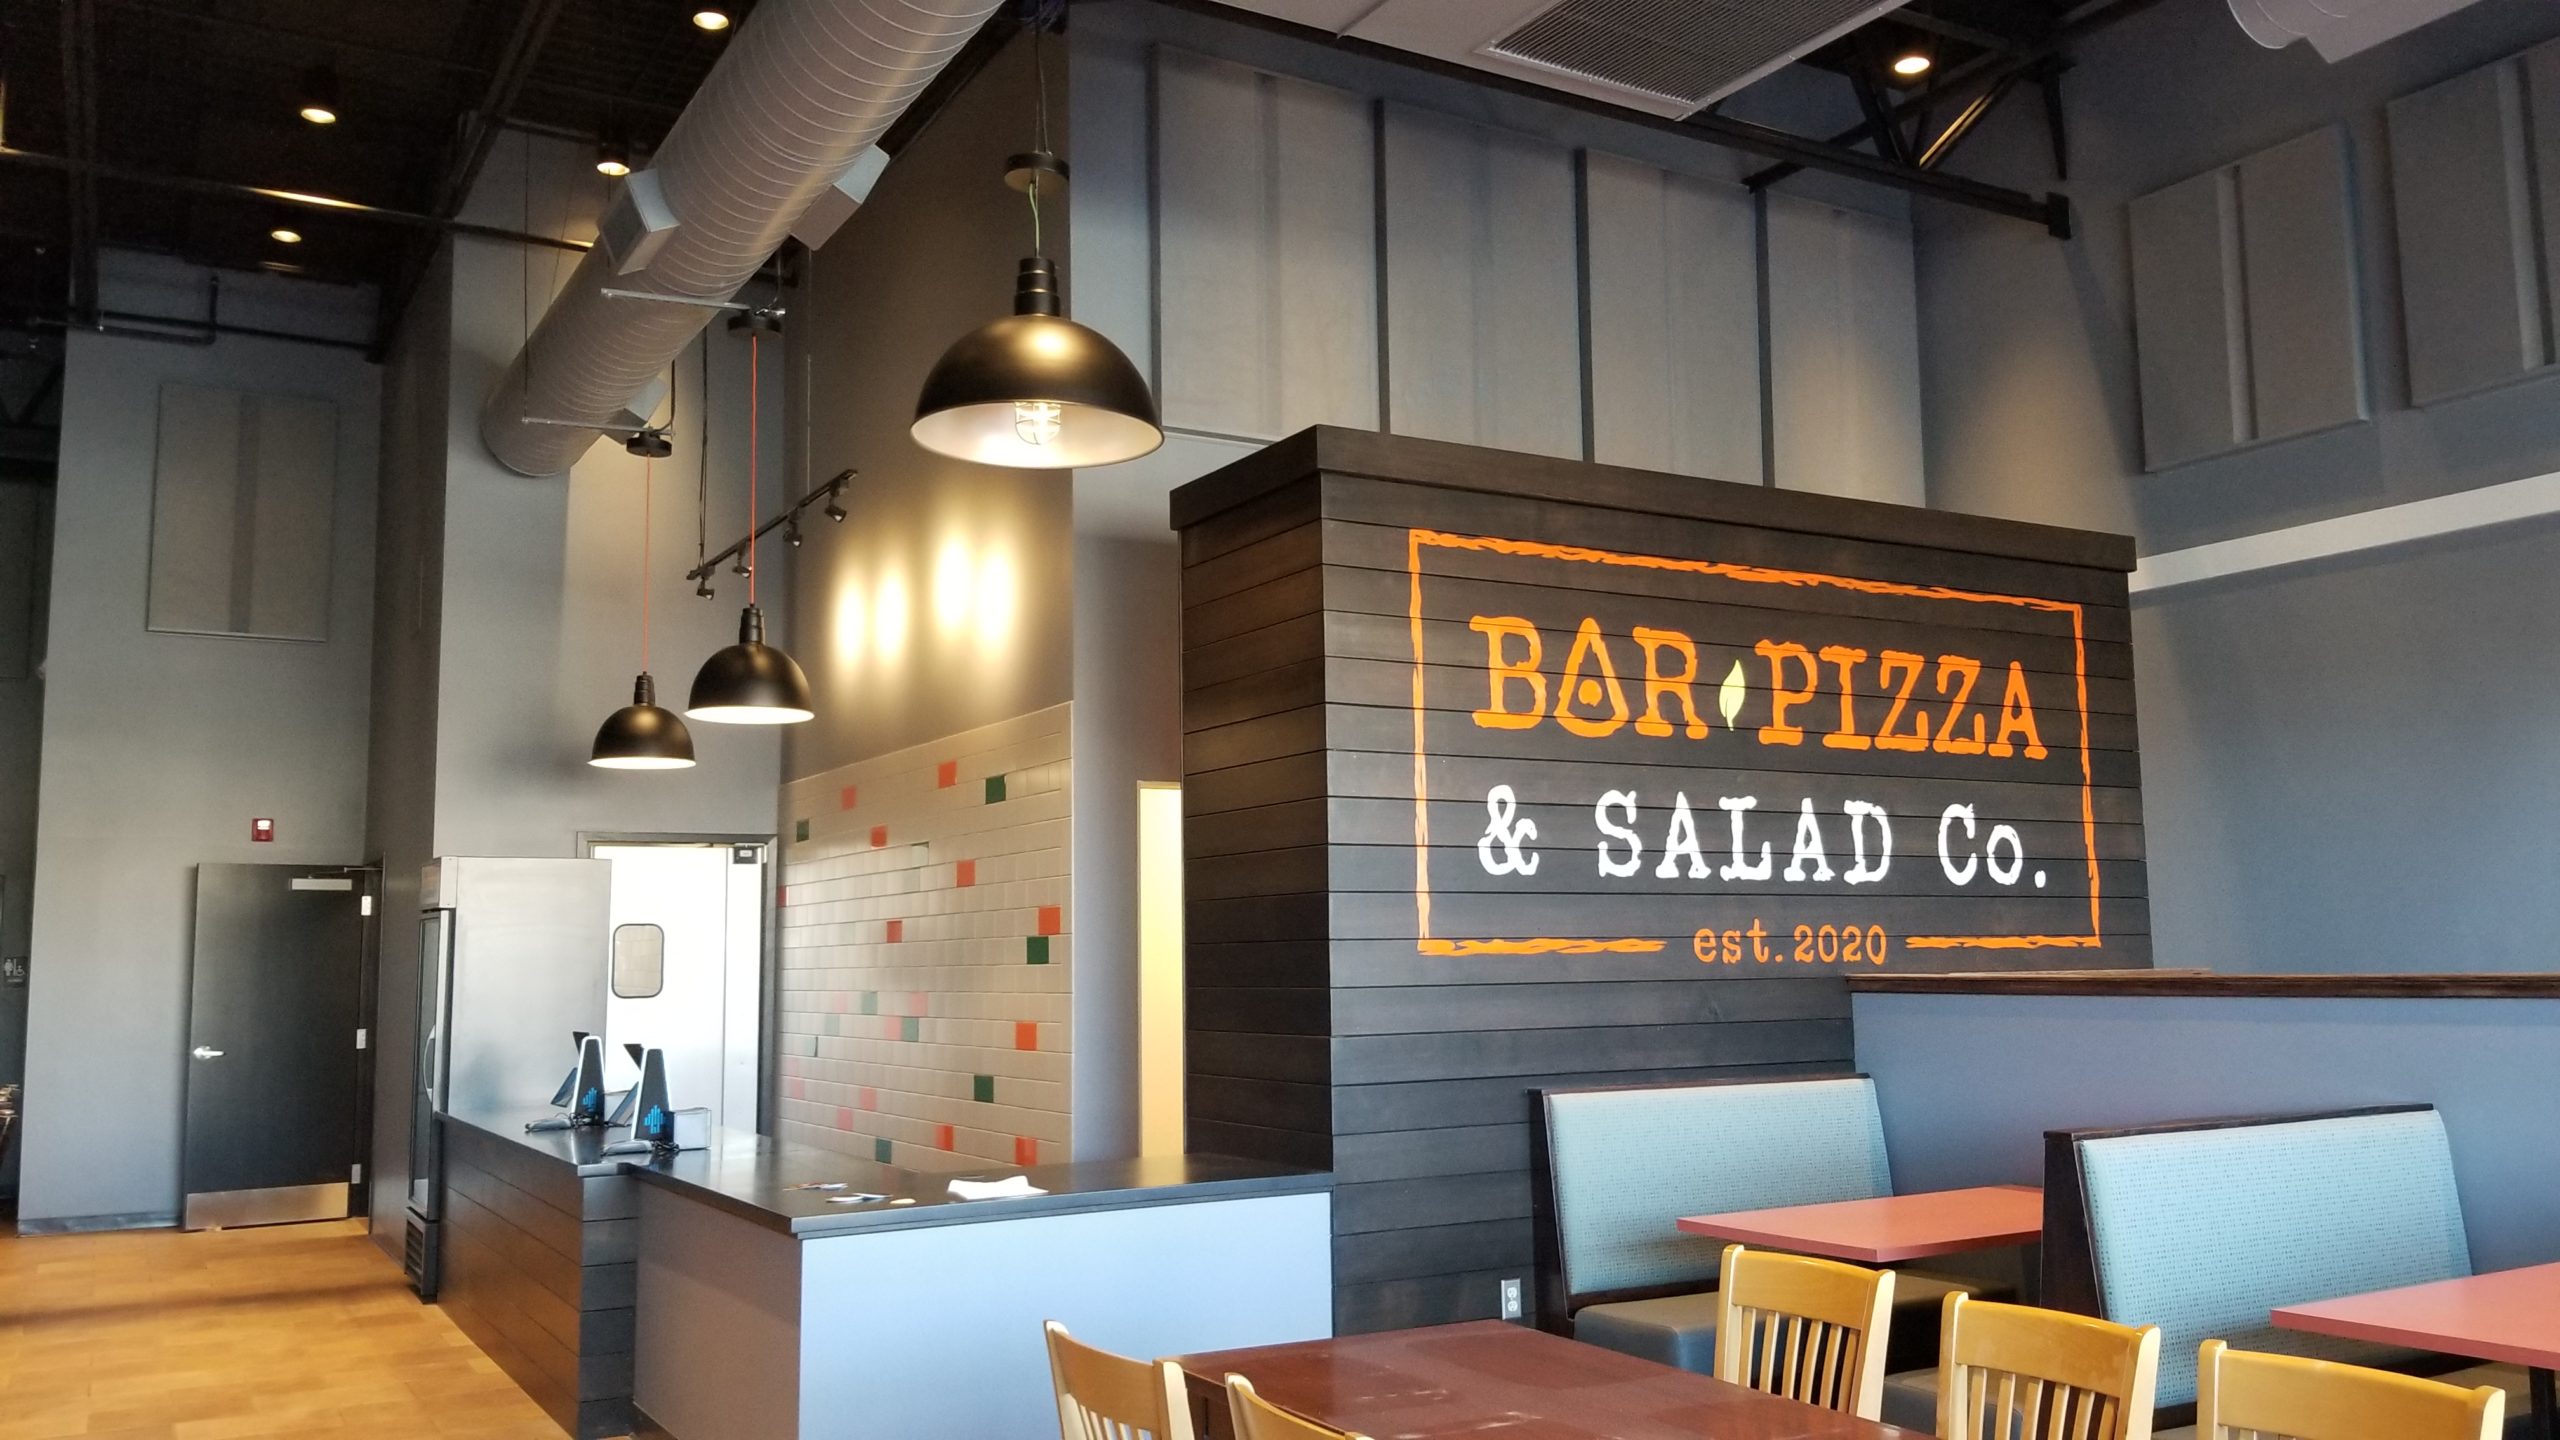 Featured image for “Bar Pizza & Salad”